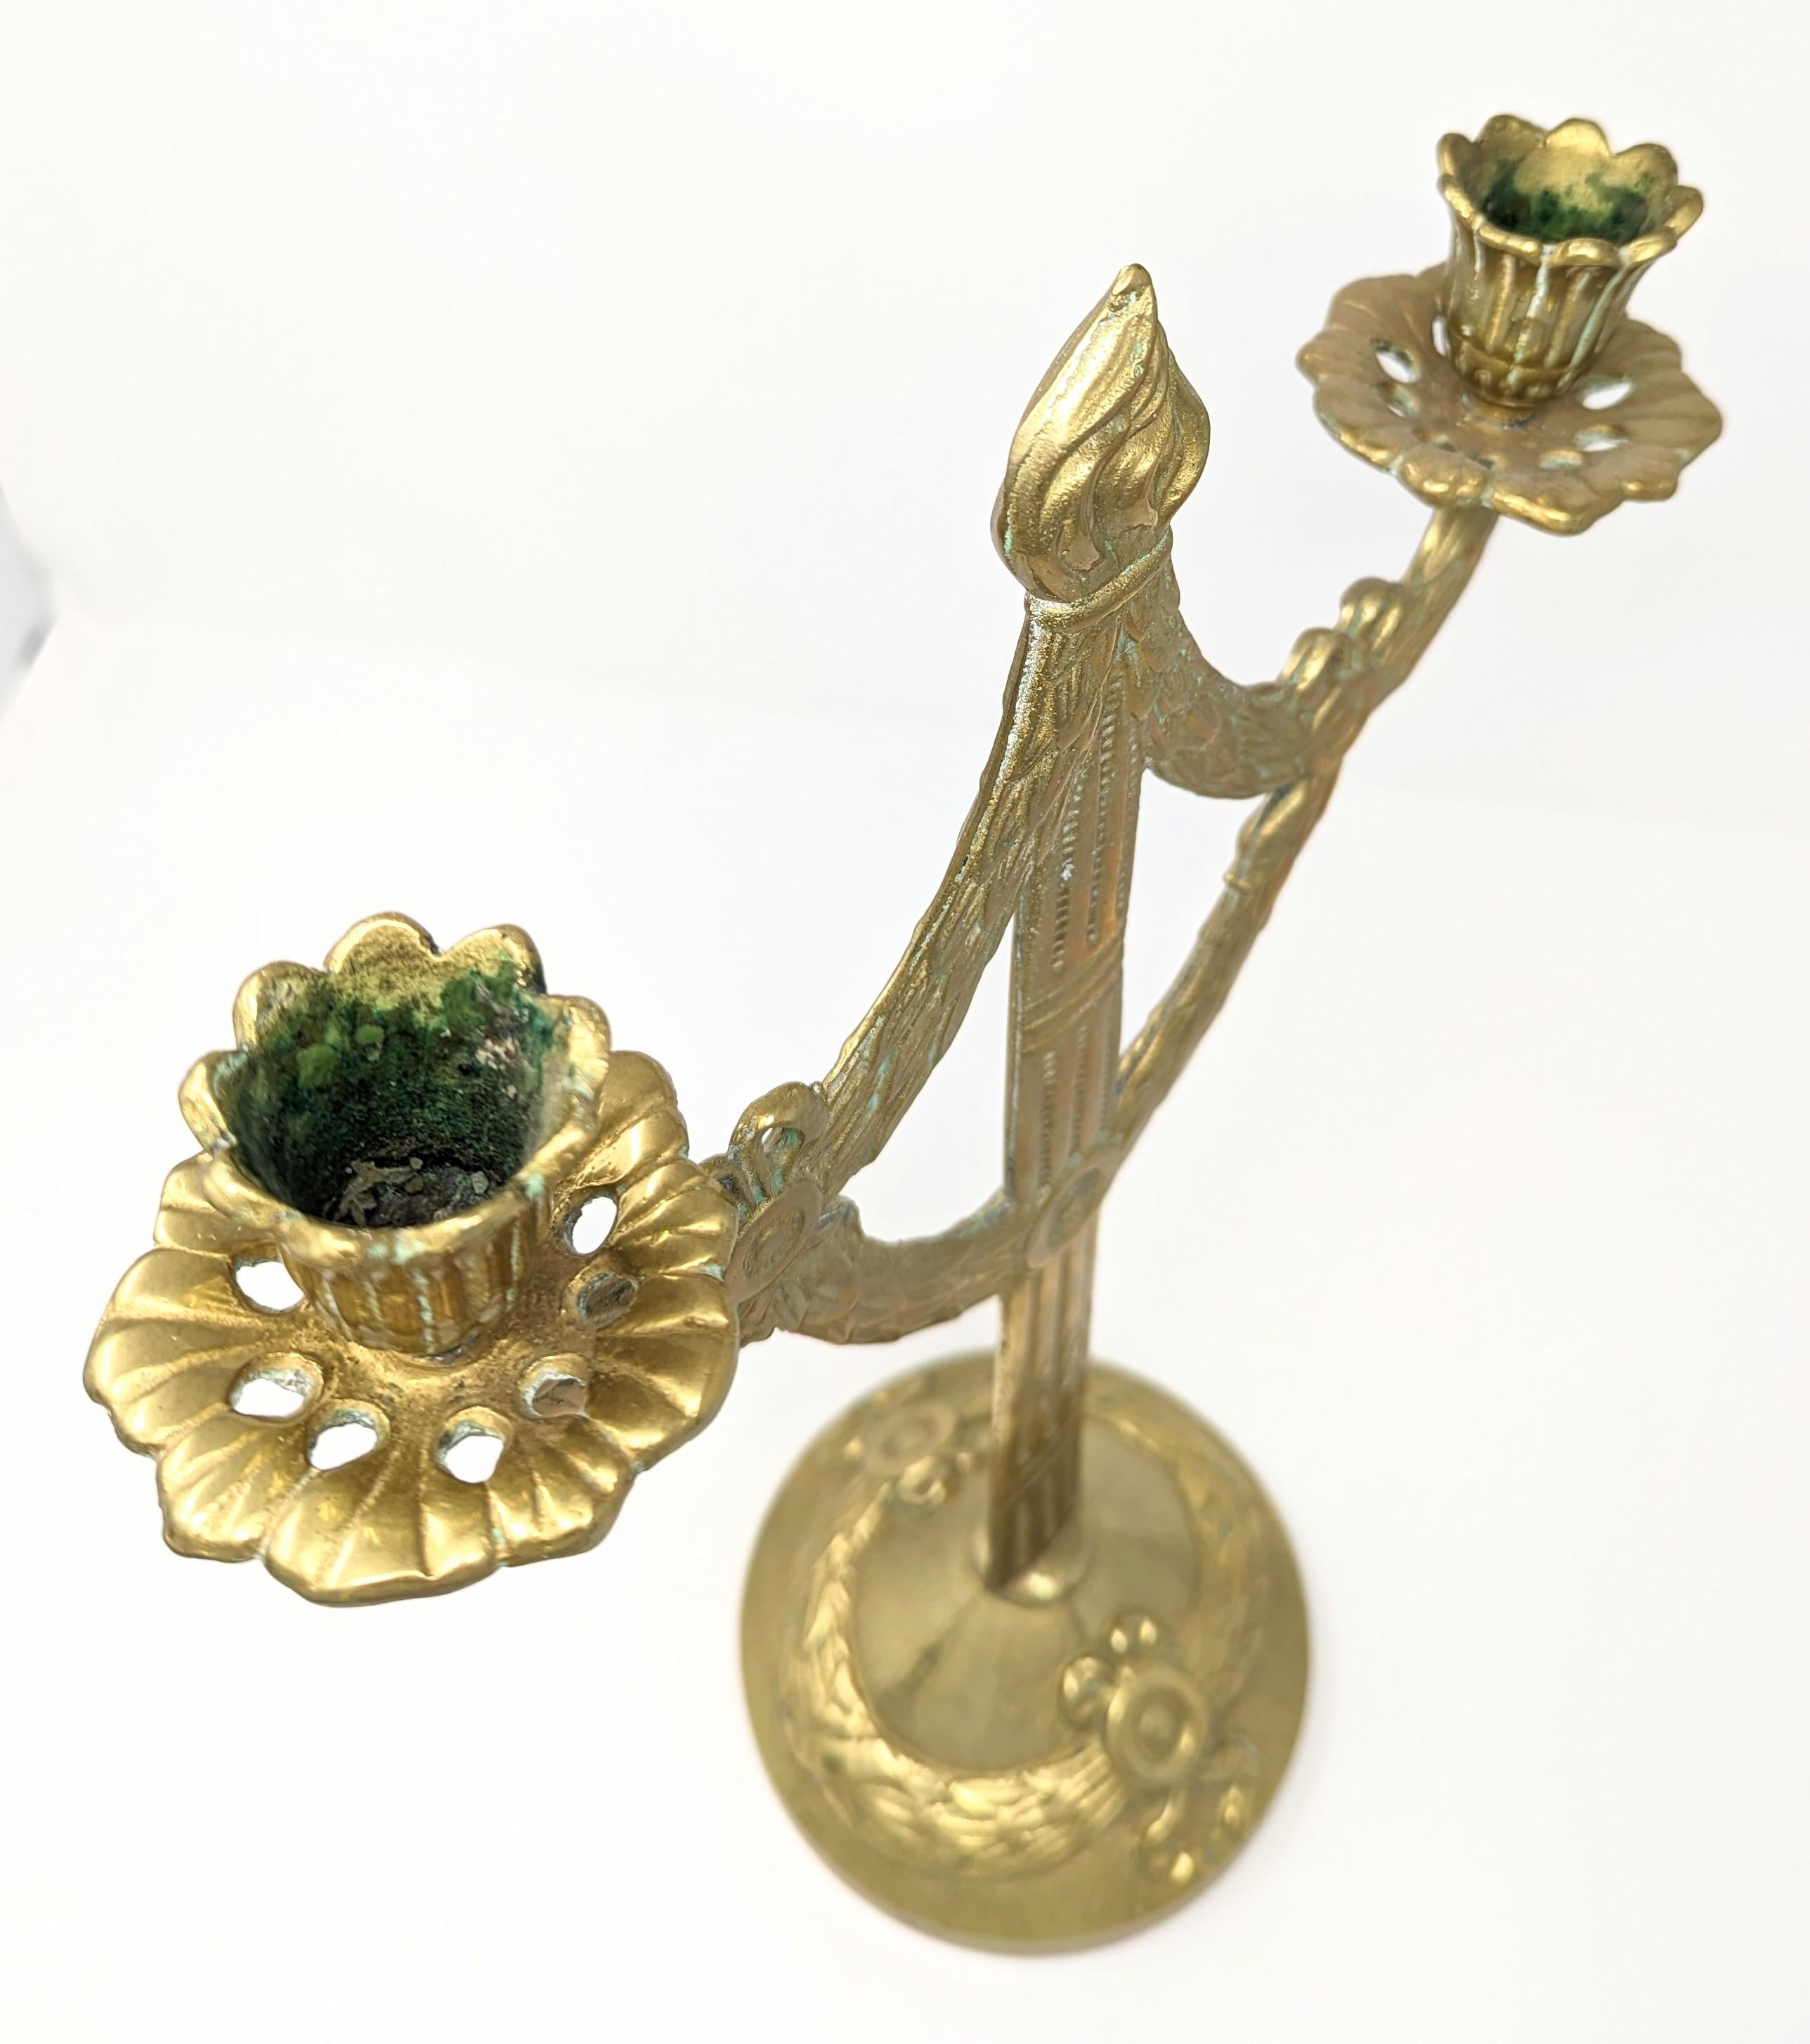 Antique Brass Candelabra Two Arm Candlestick w/ Classical Ribbon & Wreath Design For Sale 1